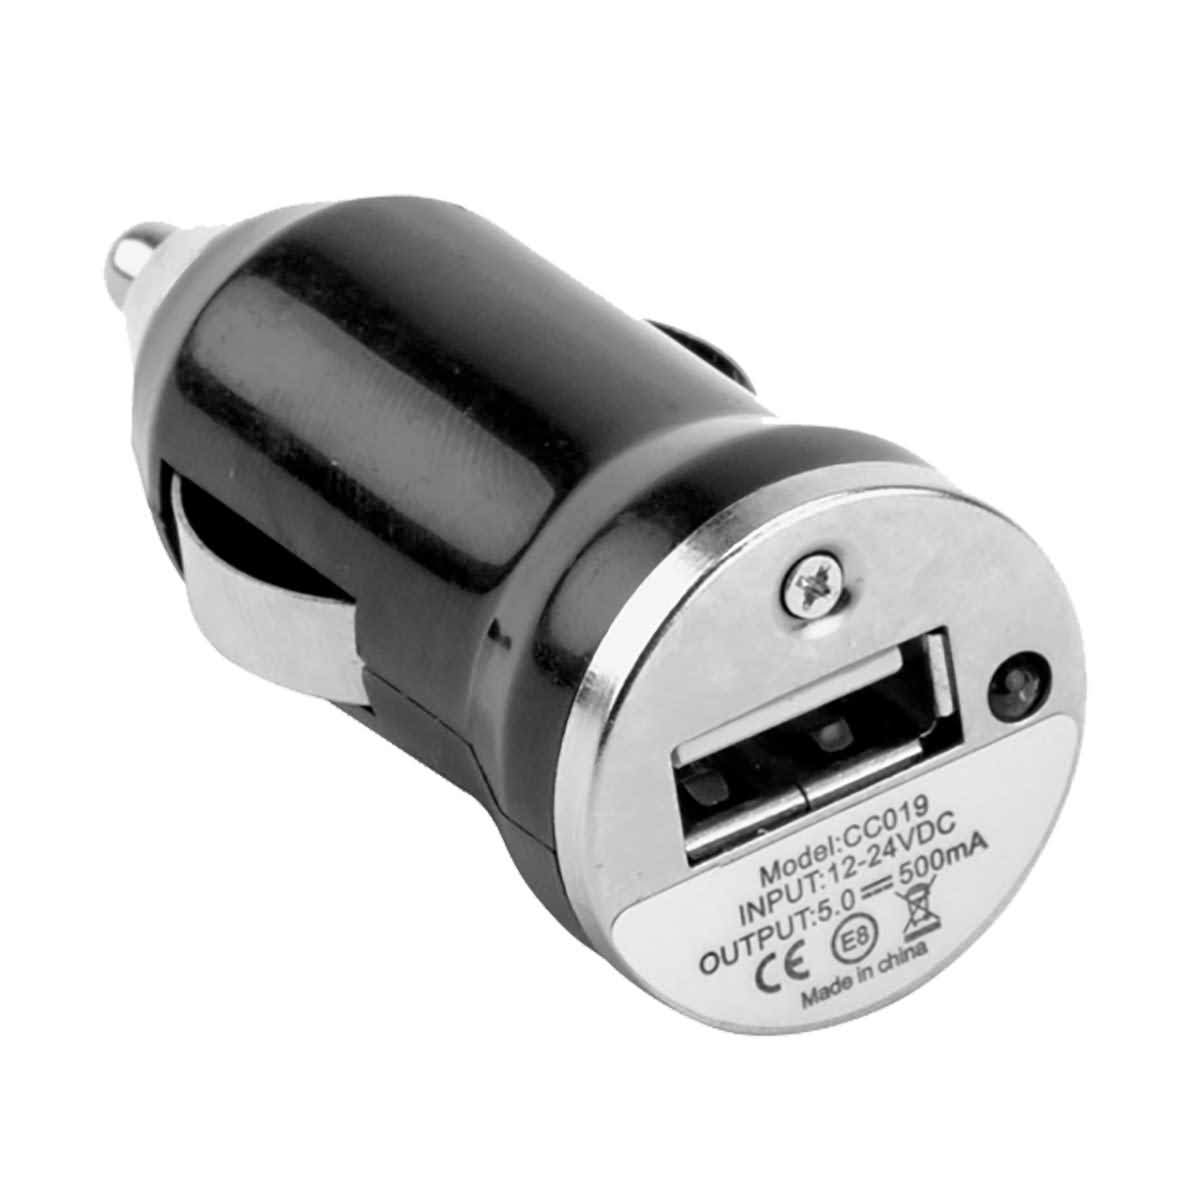 UClear USB DC Car Charger Adapter Accessories-11005